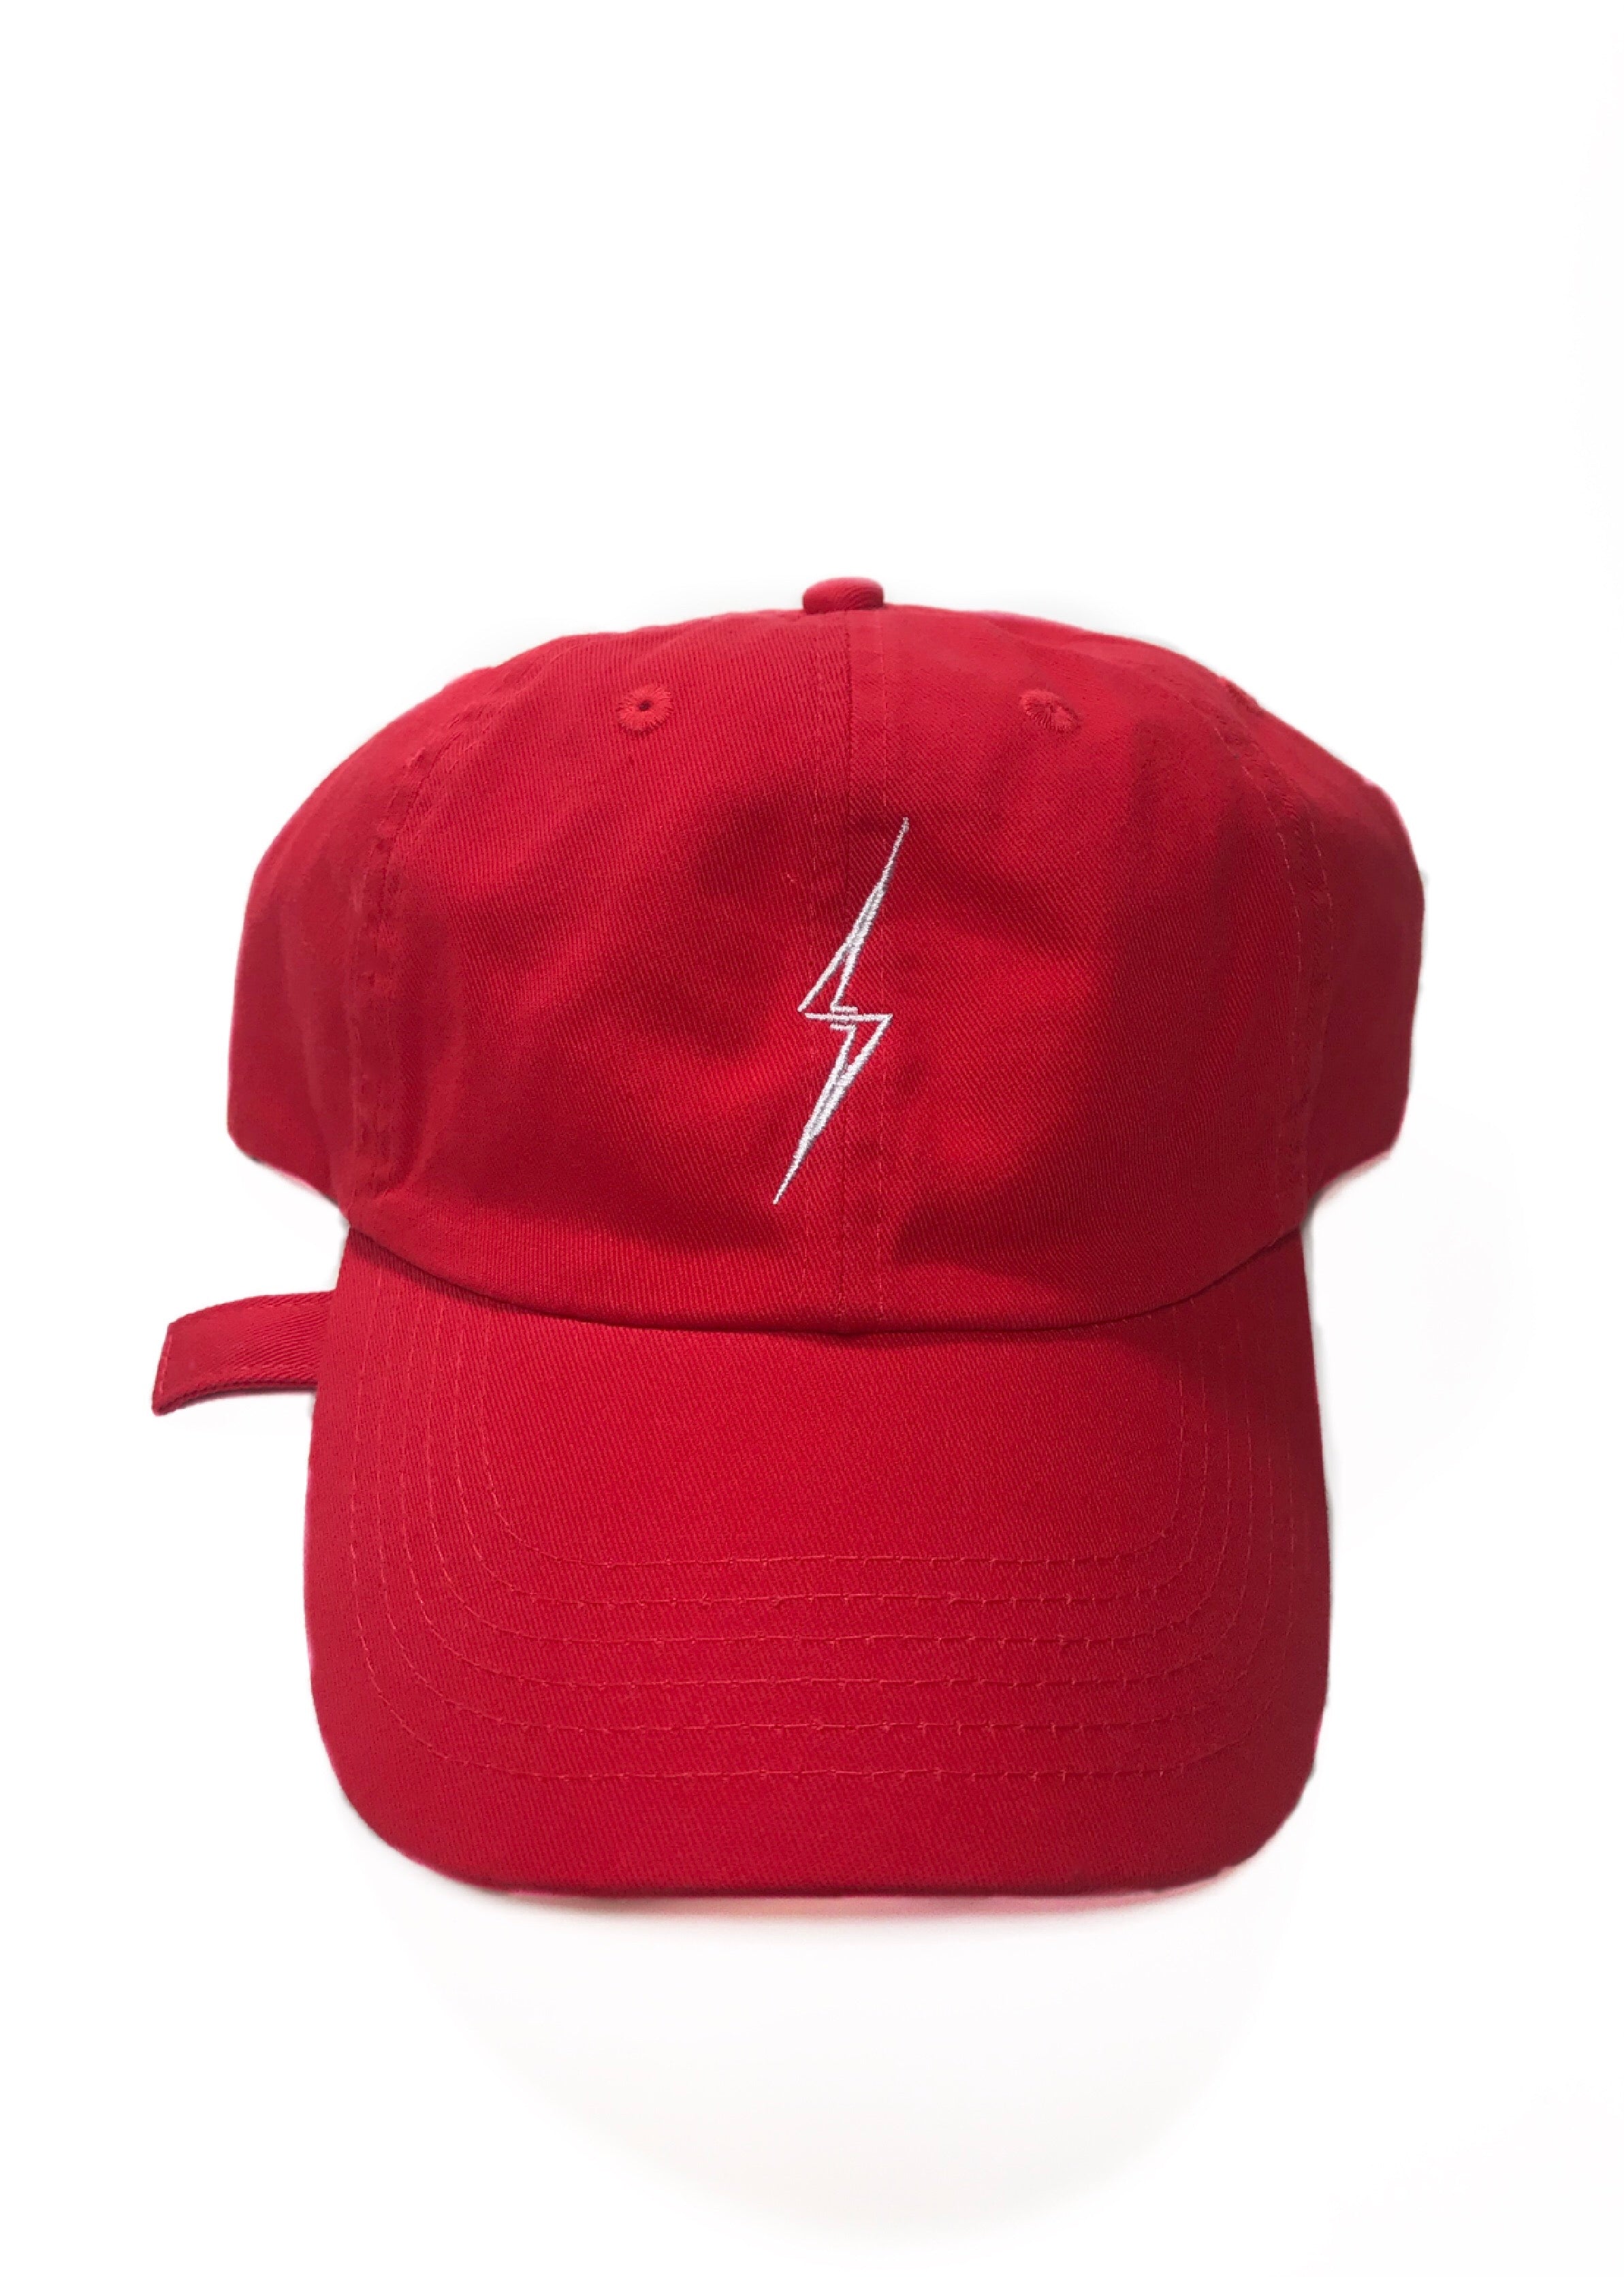 Classic Bolt Dad Hat-Red/White